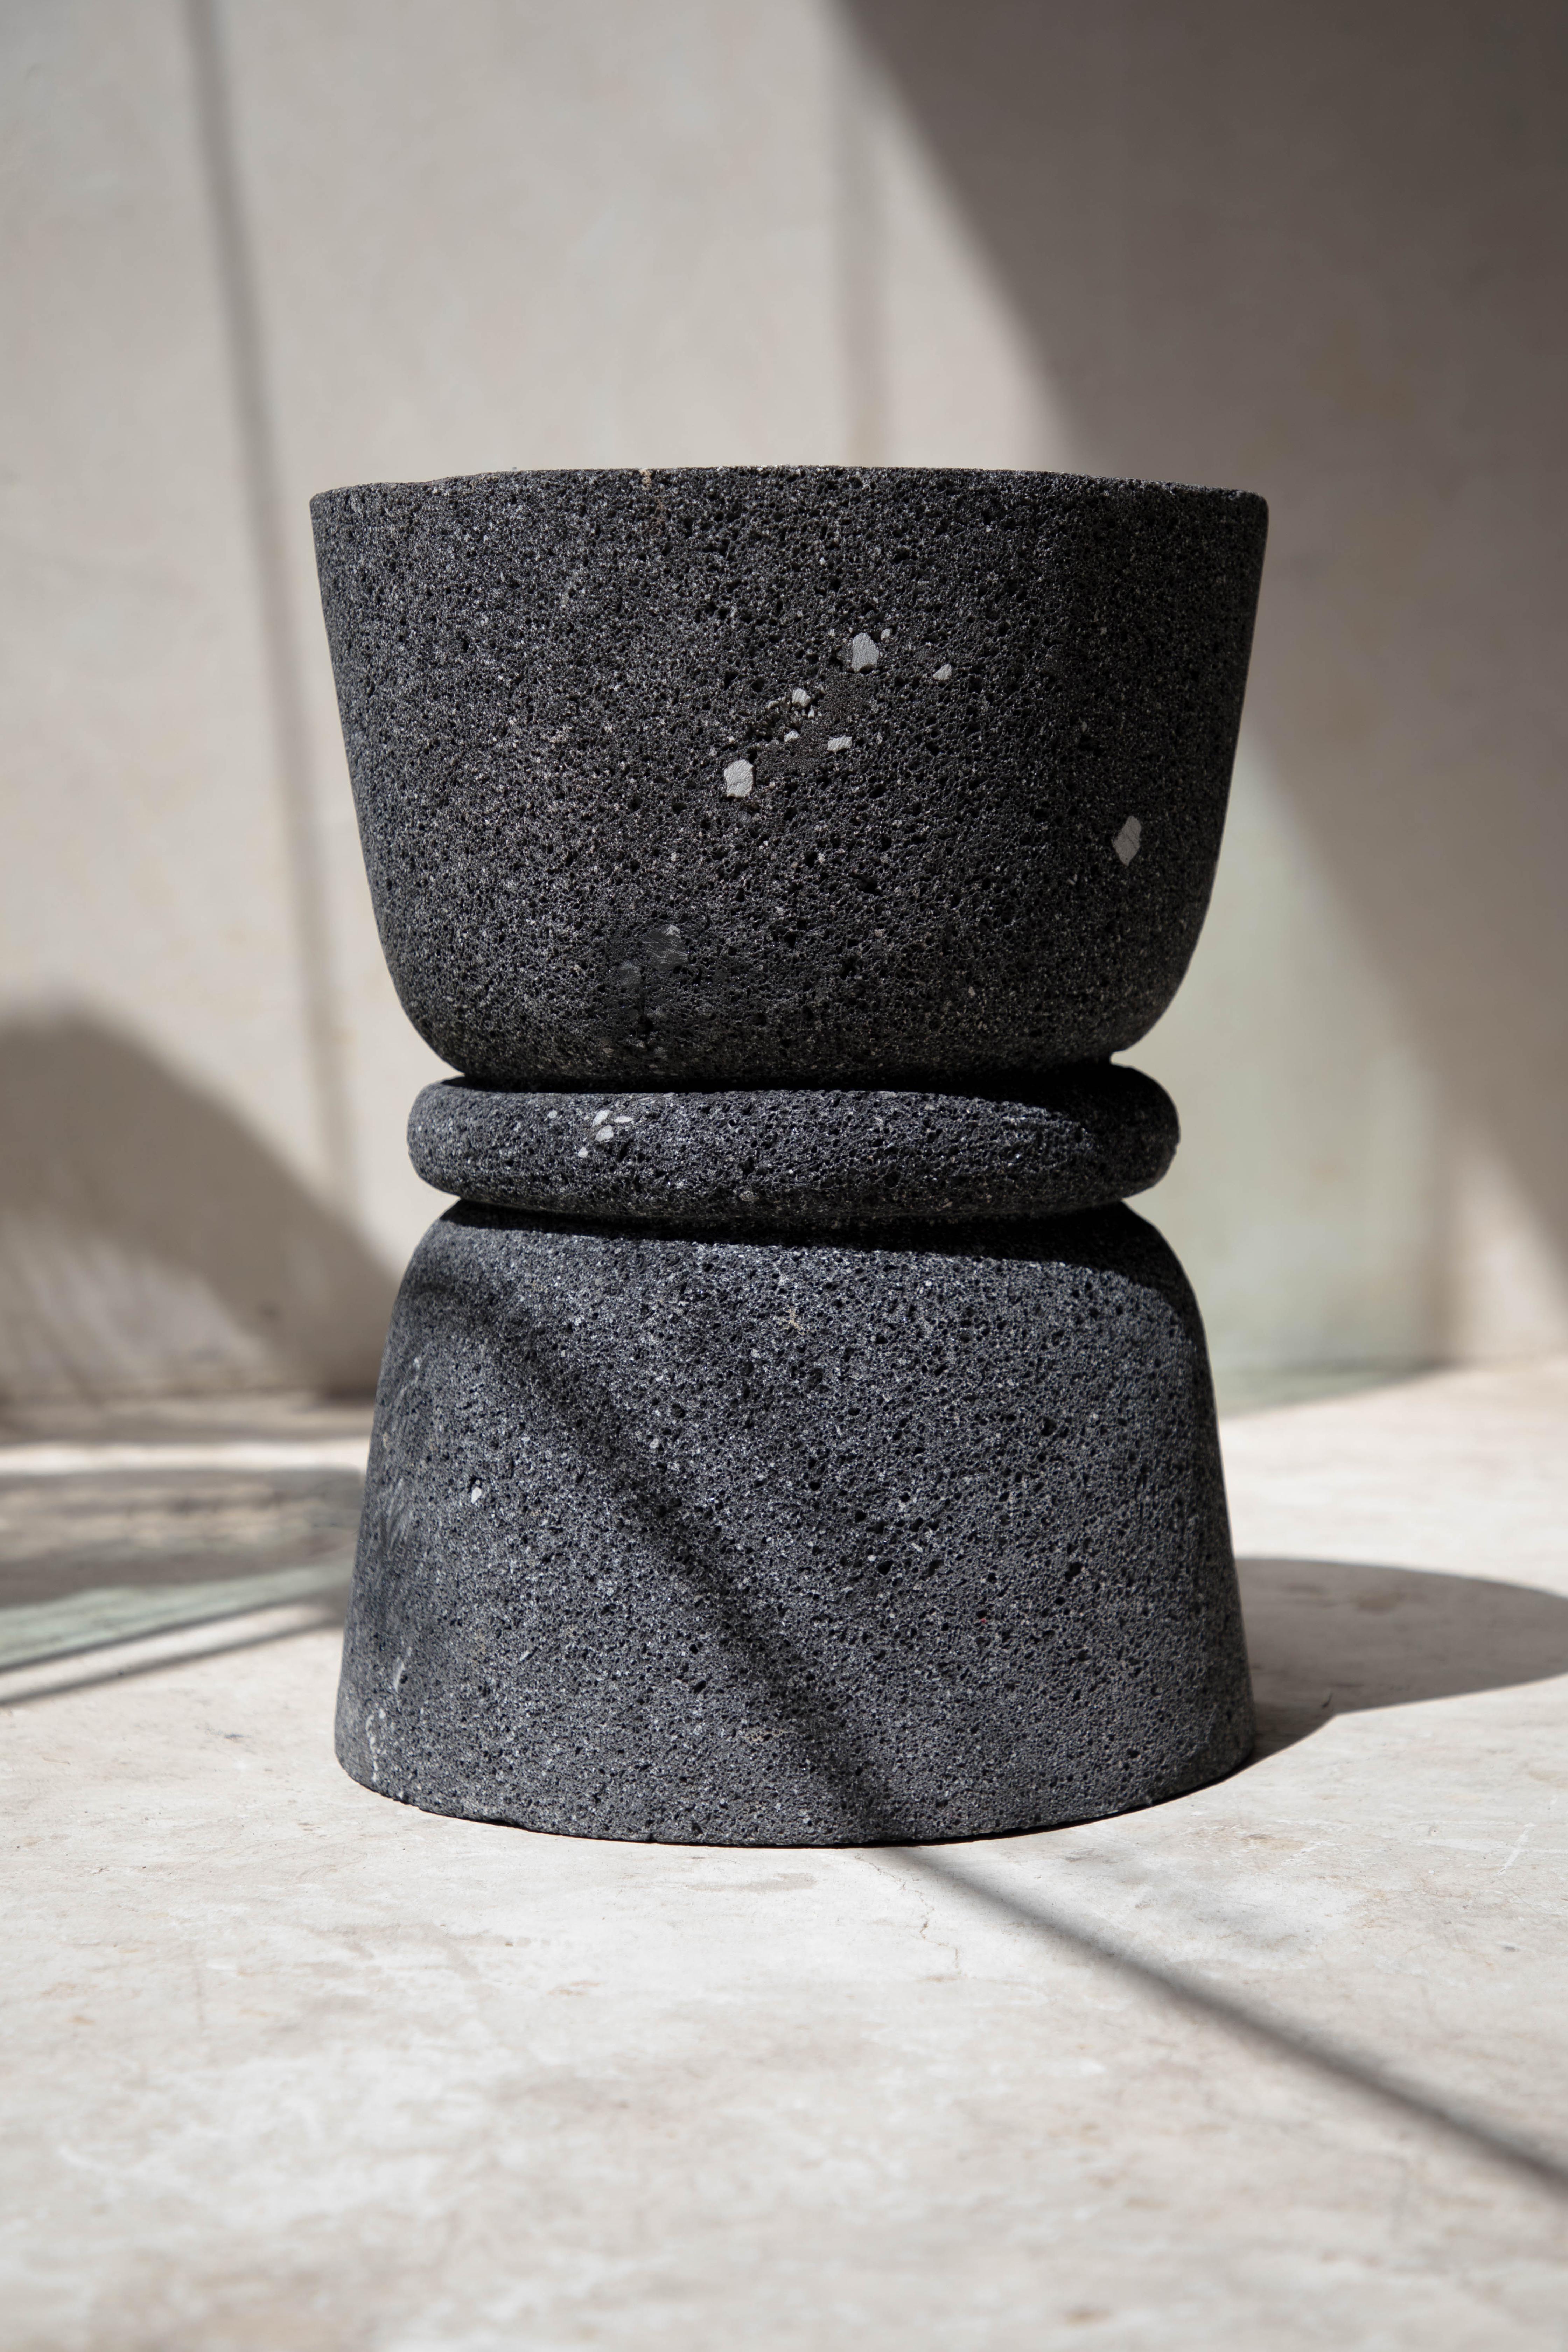 Stone totem 16 by Daniel Orozco
Material: Volcanic rock.
Dimensions: D 30 x H 45 cm

Volvanic rock Totem.

Daniel Orozco Estudio
We are an inclusive interior design estudio, who love to work with fabrics and natural textiles in makes our spaces